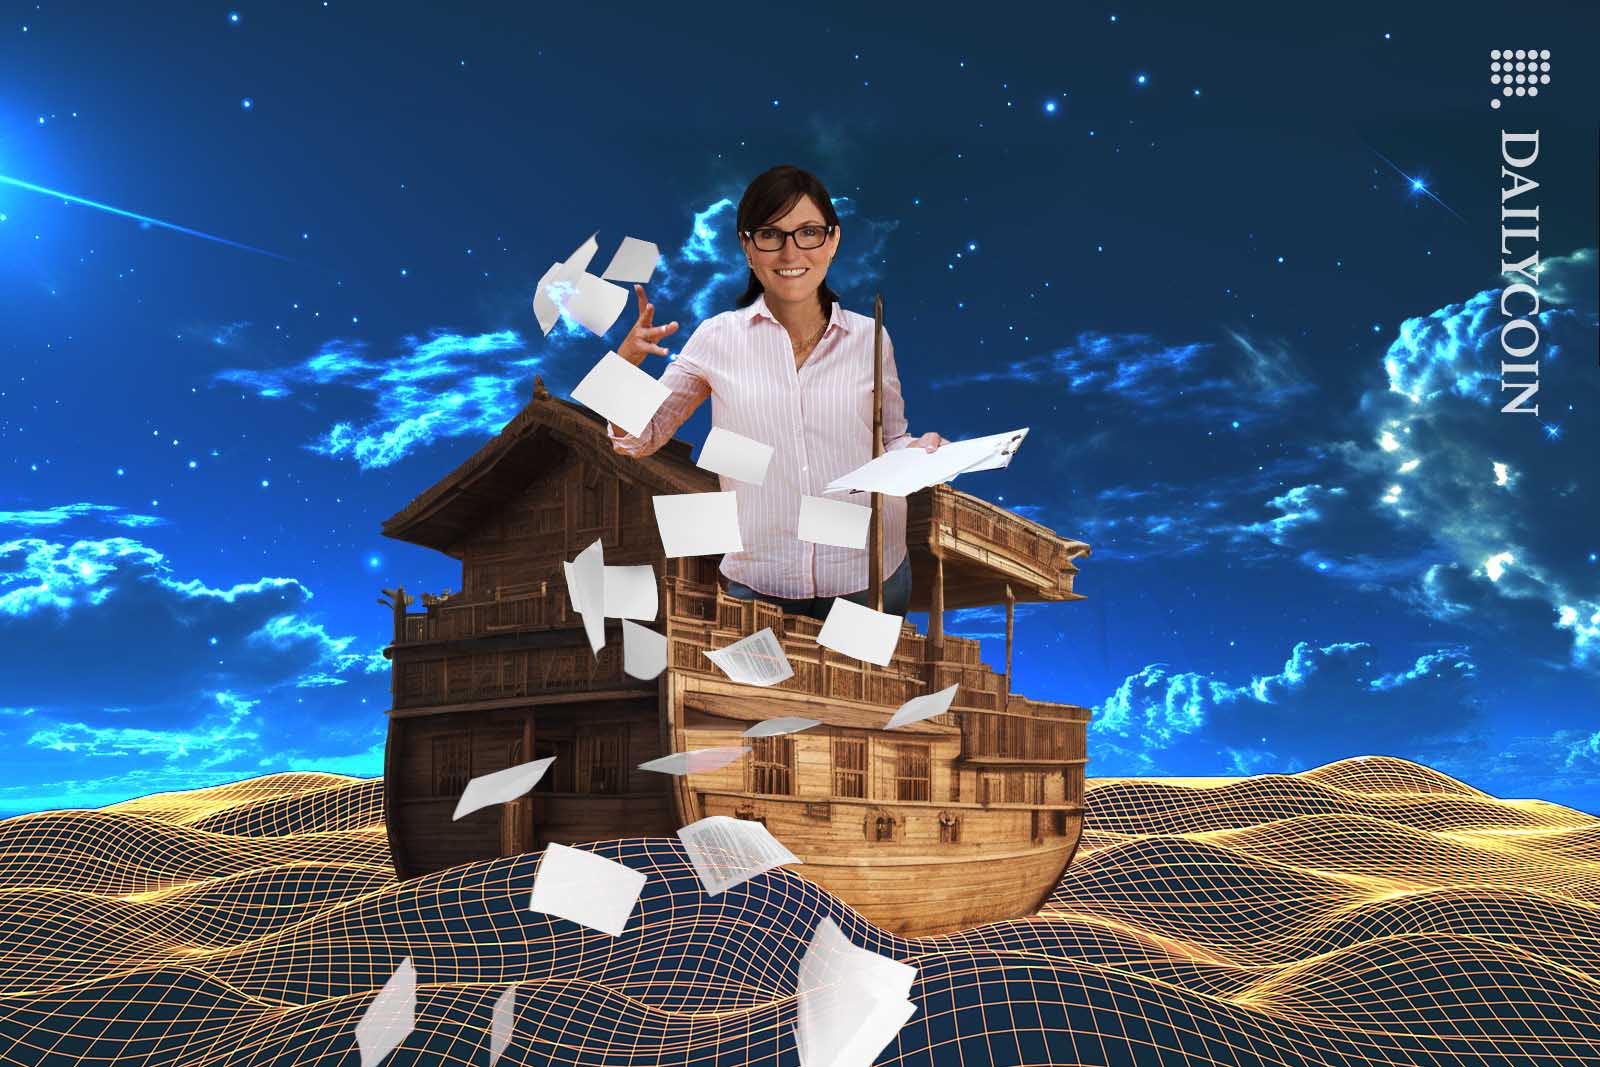 Catherine Wood throwing papers into a wireframe sea from a wooden ark.